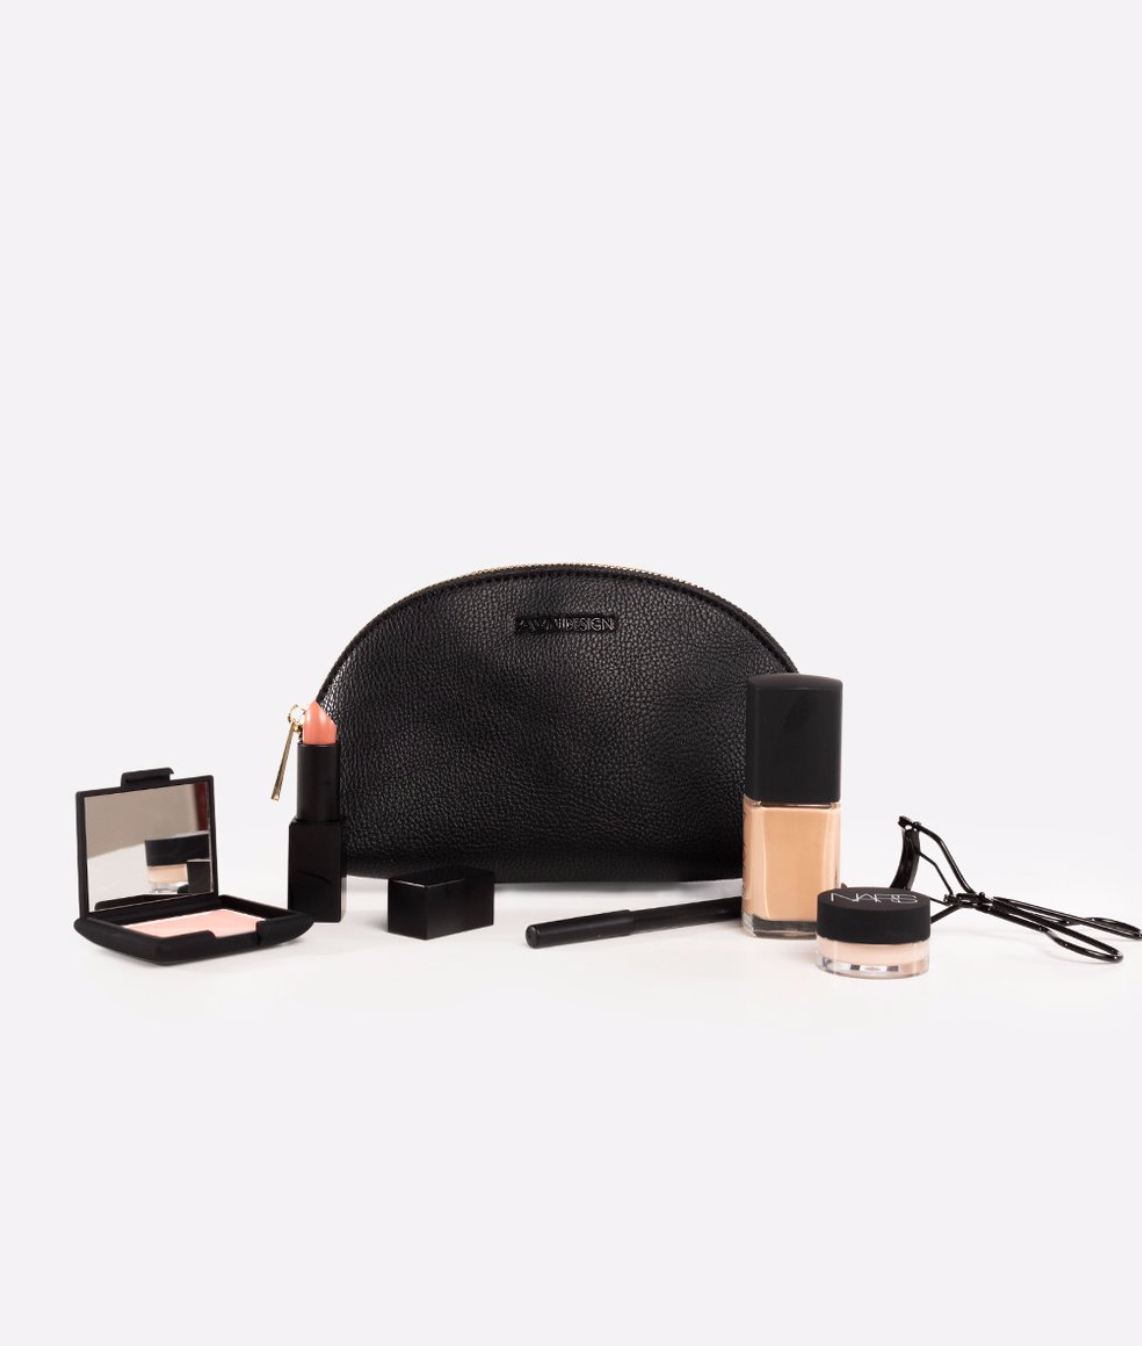 Load image into Gallery viewer, FAWN DESIGN THE COSMETIC BAG - BLACK
